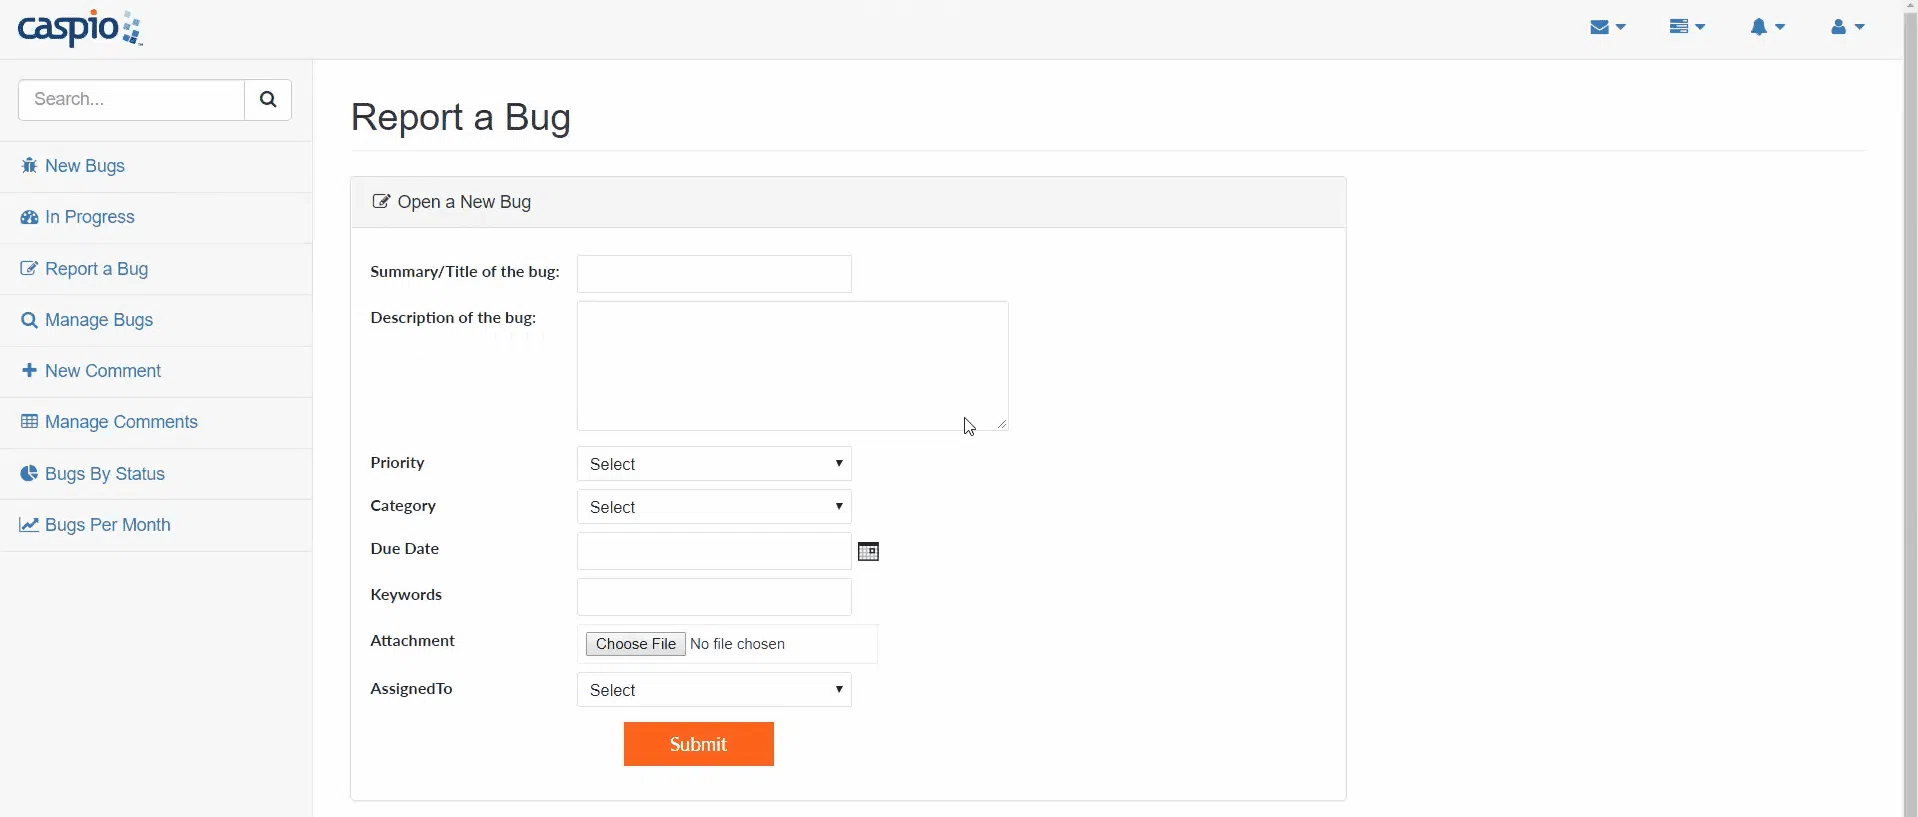 Screenshot of a sample app made on Caspio where users can report a bug by submitting a form.